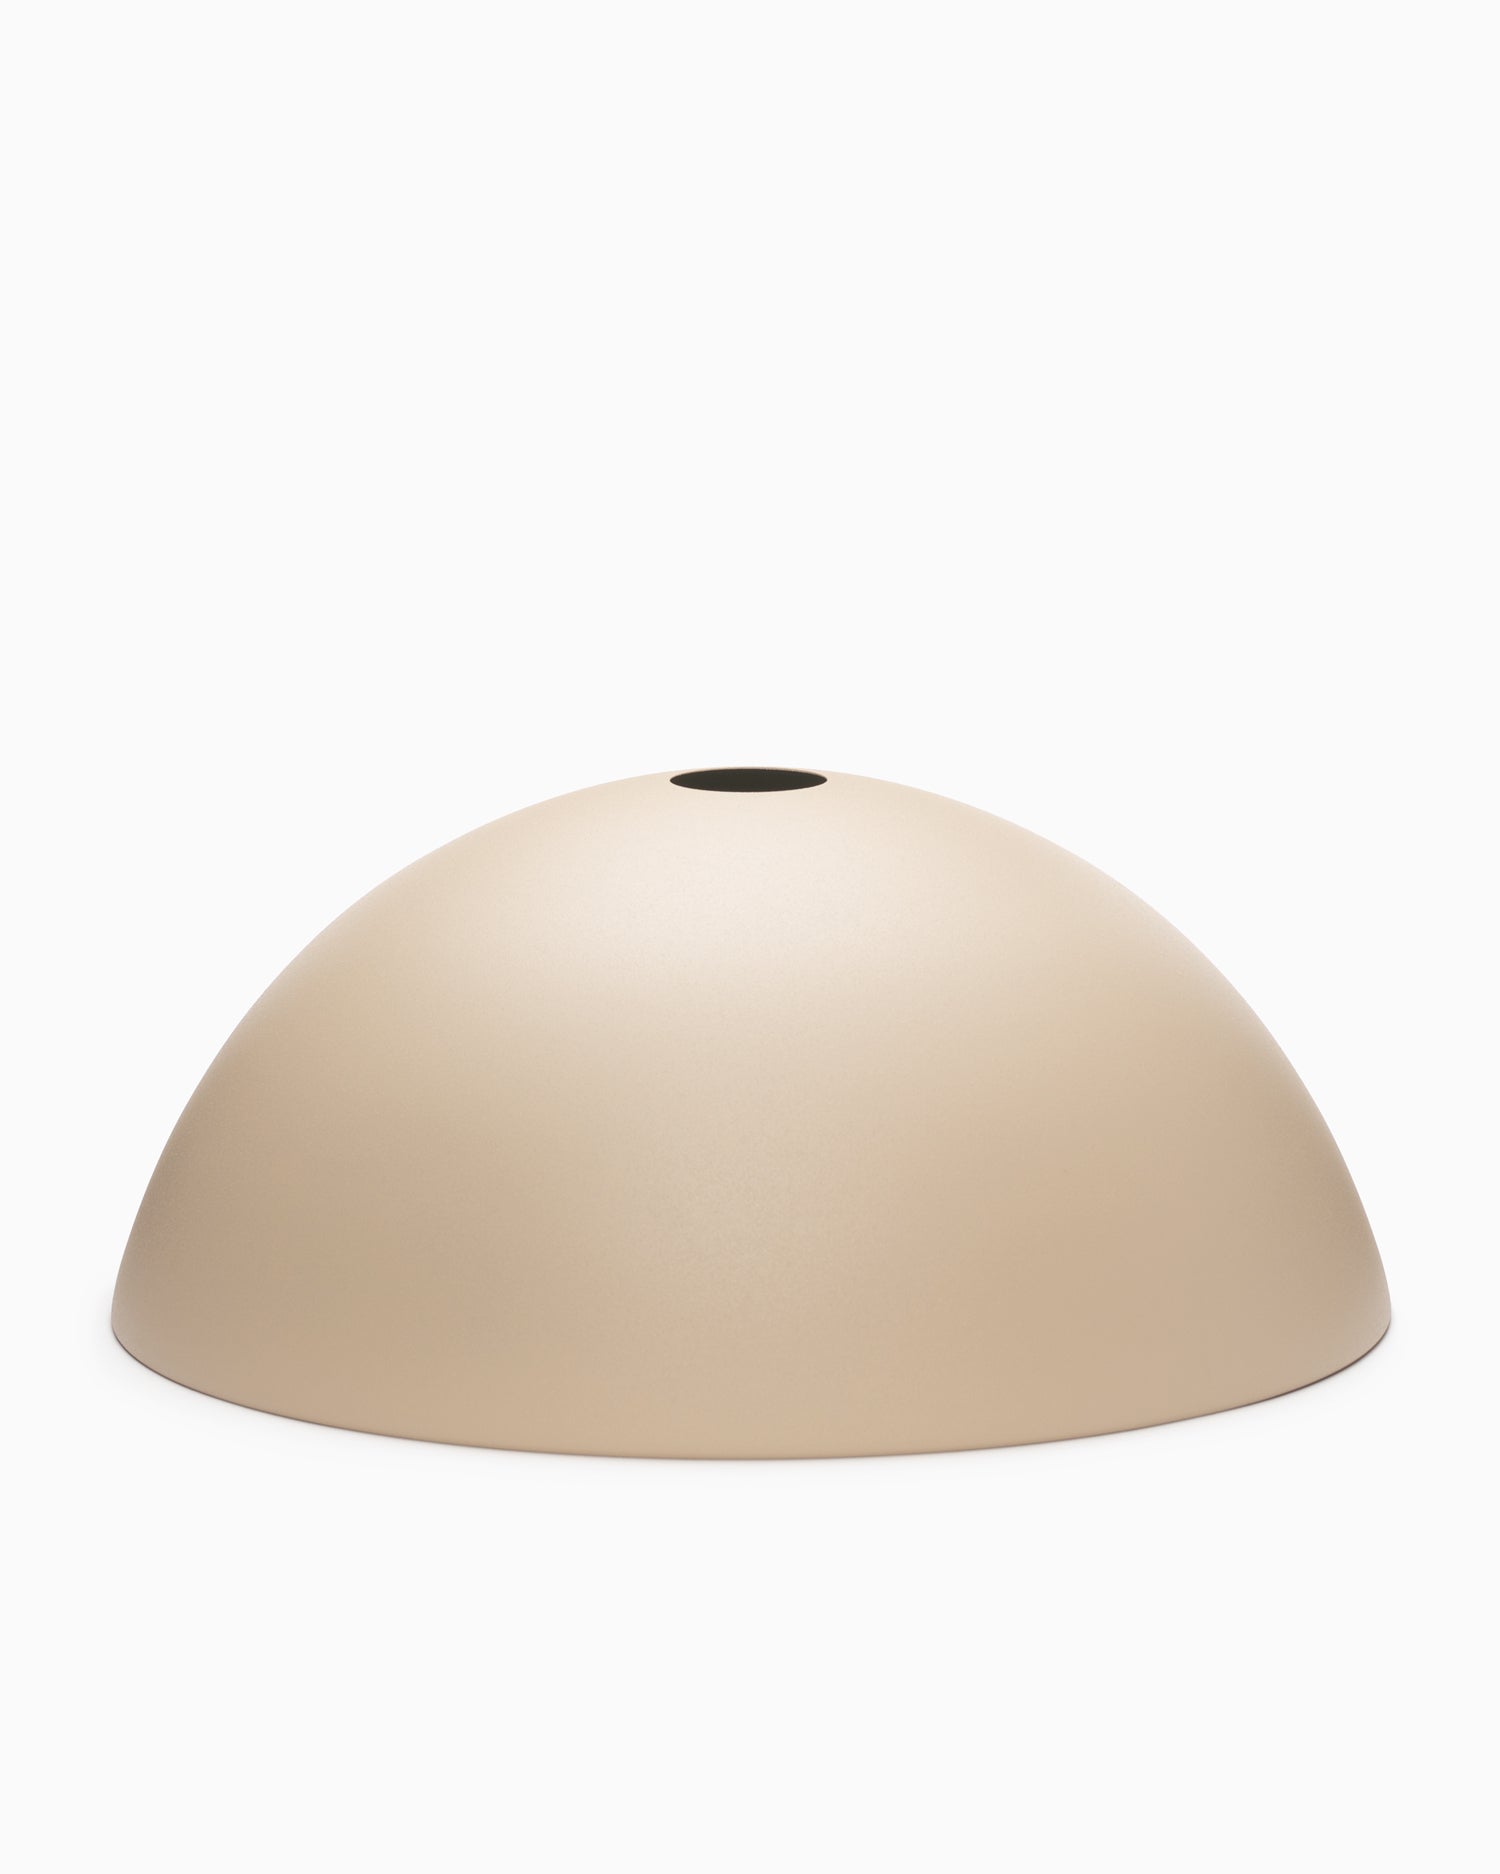 Collect Dome Shade - Cashmere